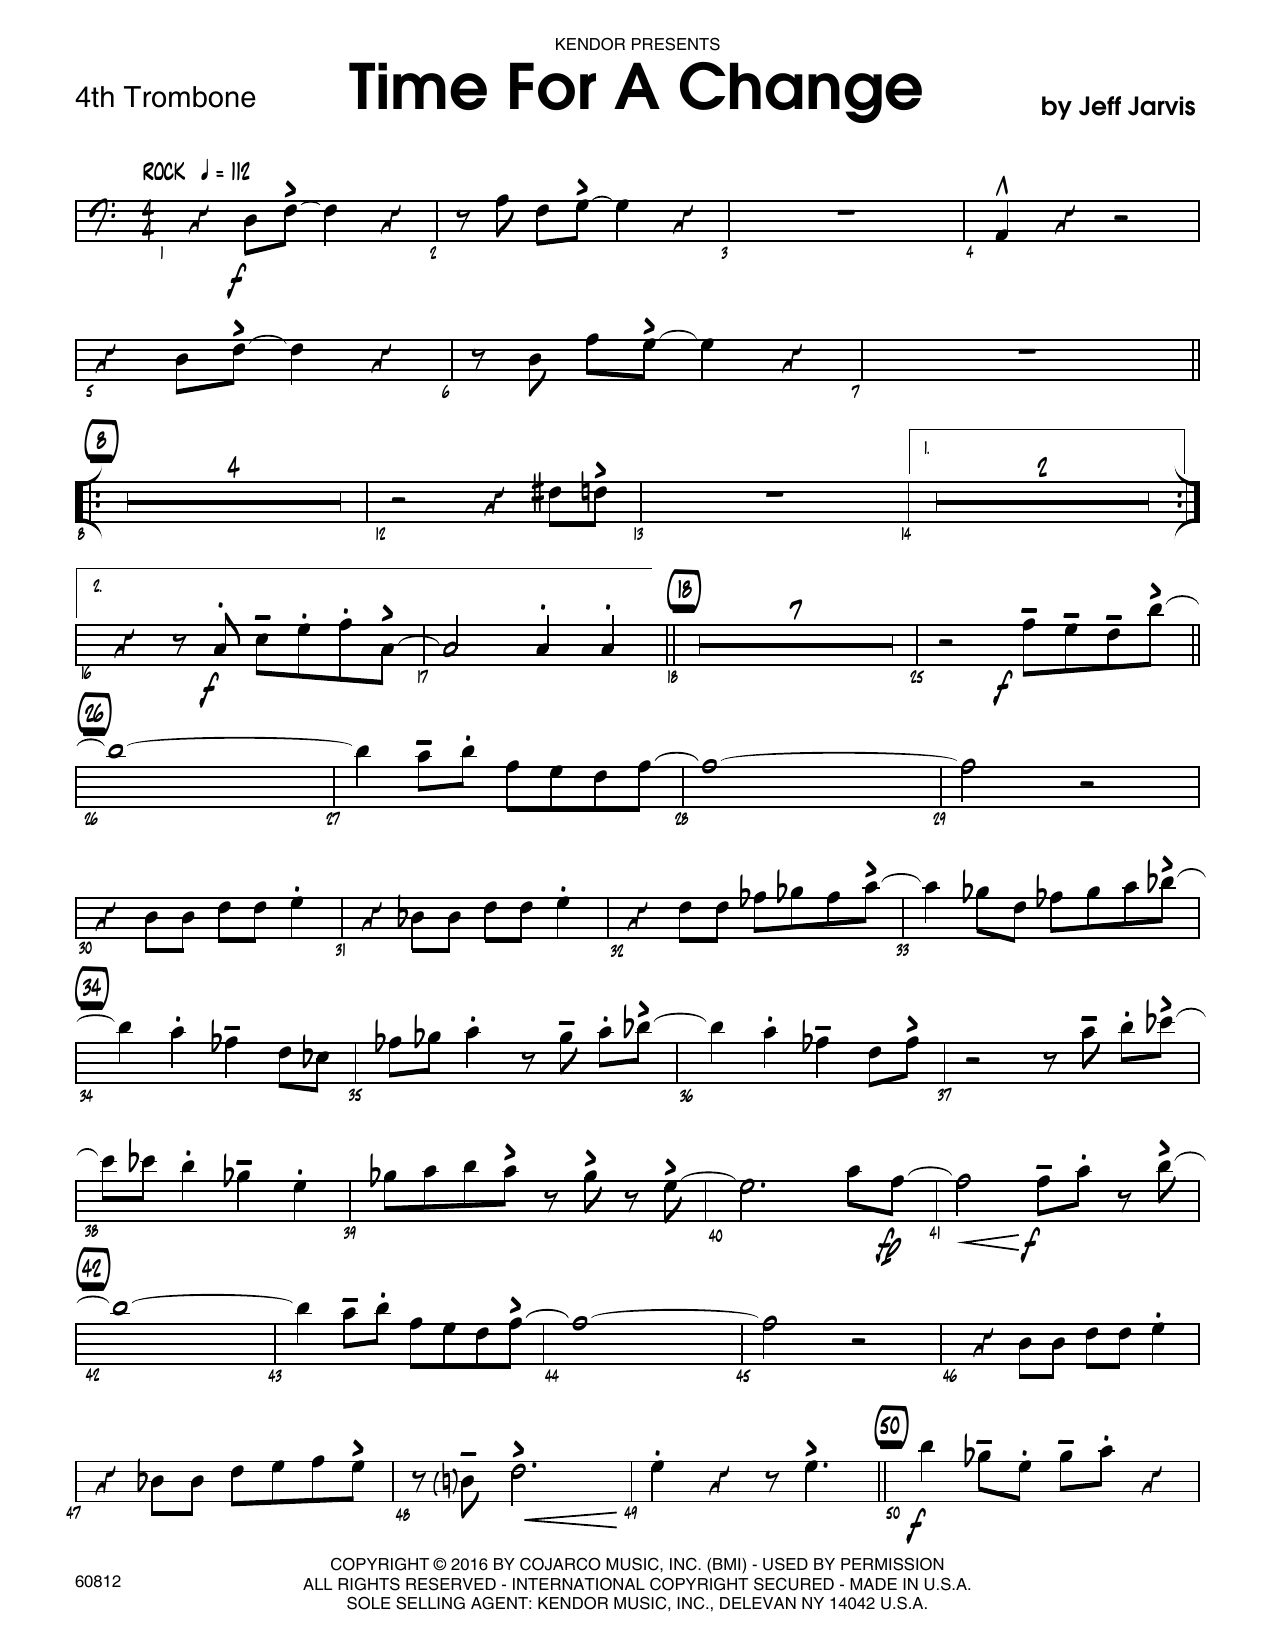 Download Jeff Jarvis Time For A Change - 4th Trombone Sheet Music